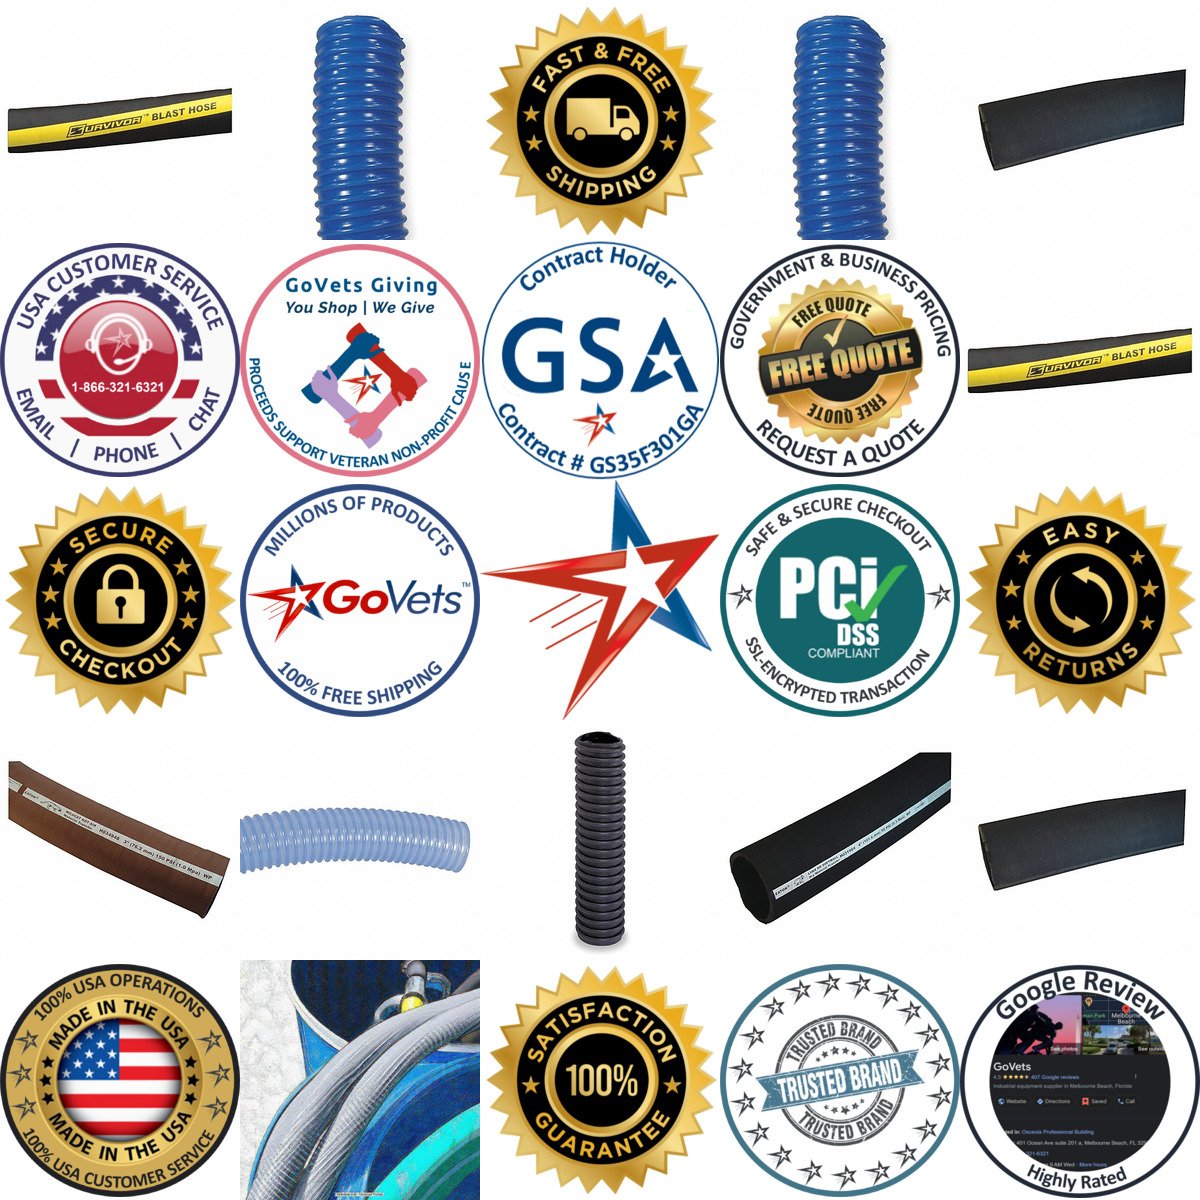 A selection of Bulk Material Handling Hoses products on GoVets